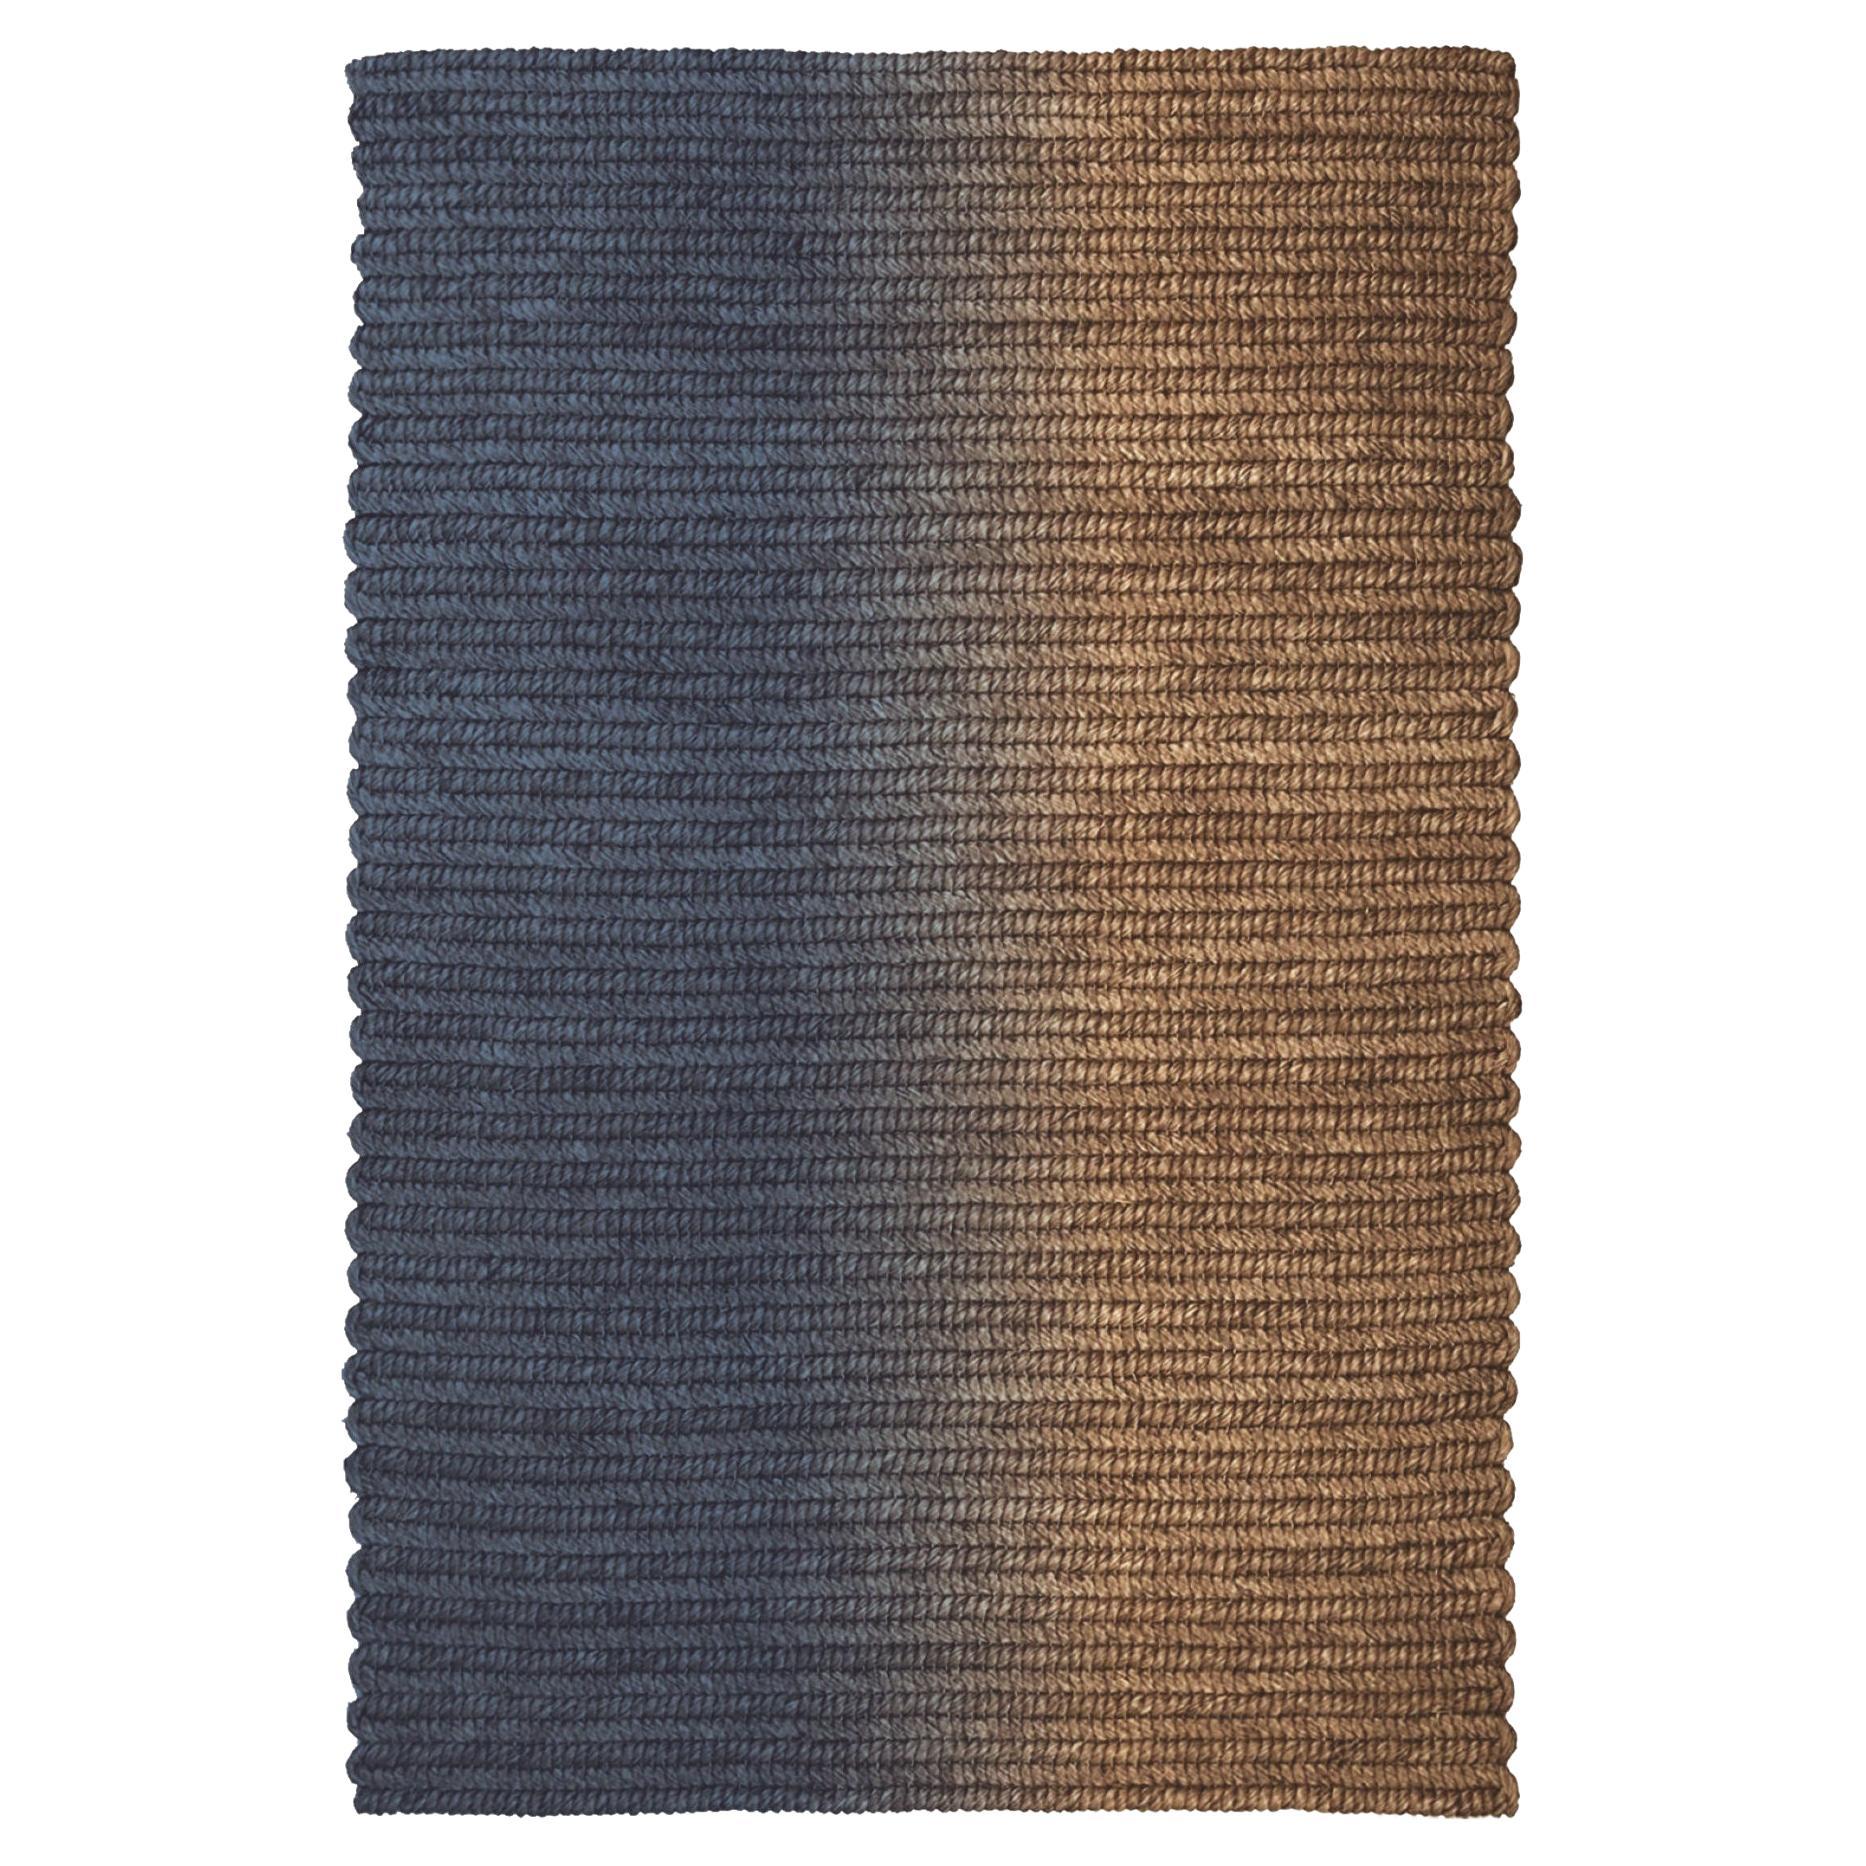 'Switch' Rug in Abaca, 'Royal Blue', by Claire Vos for Musett Design